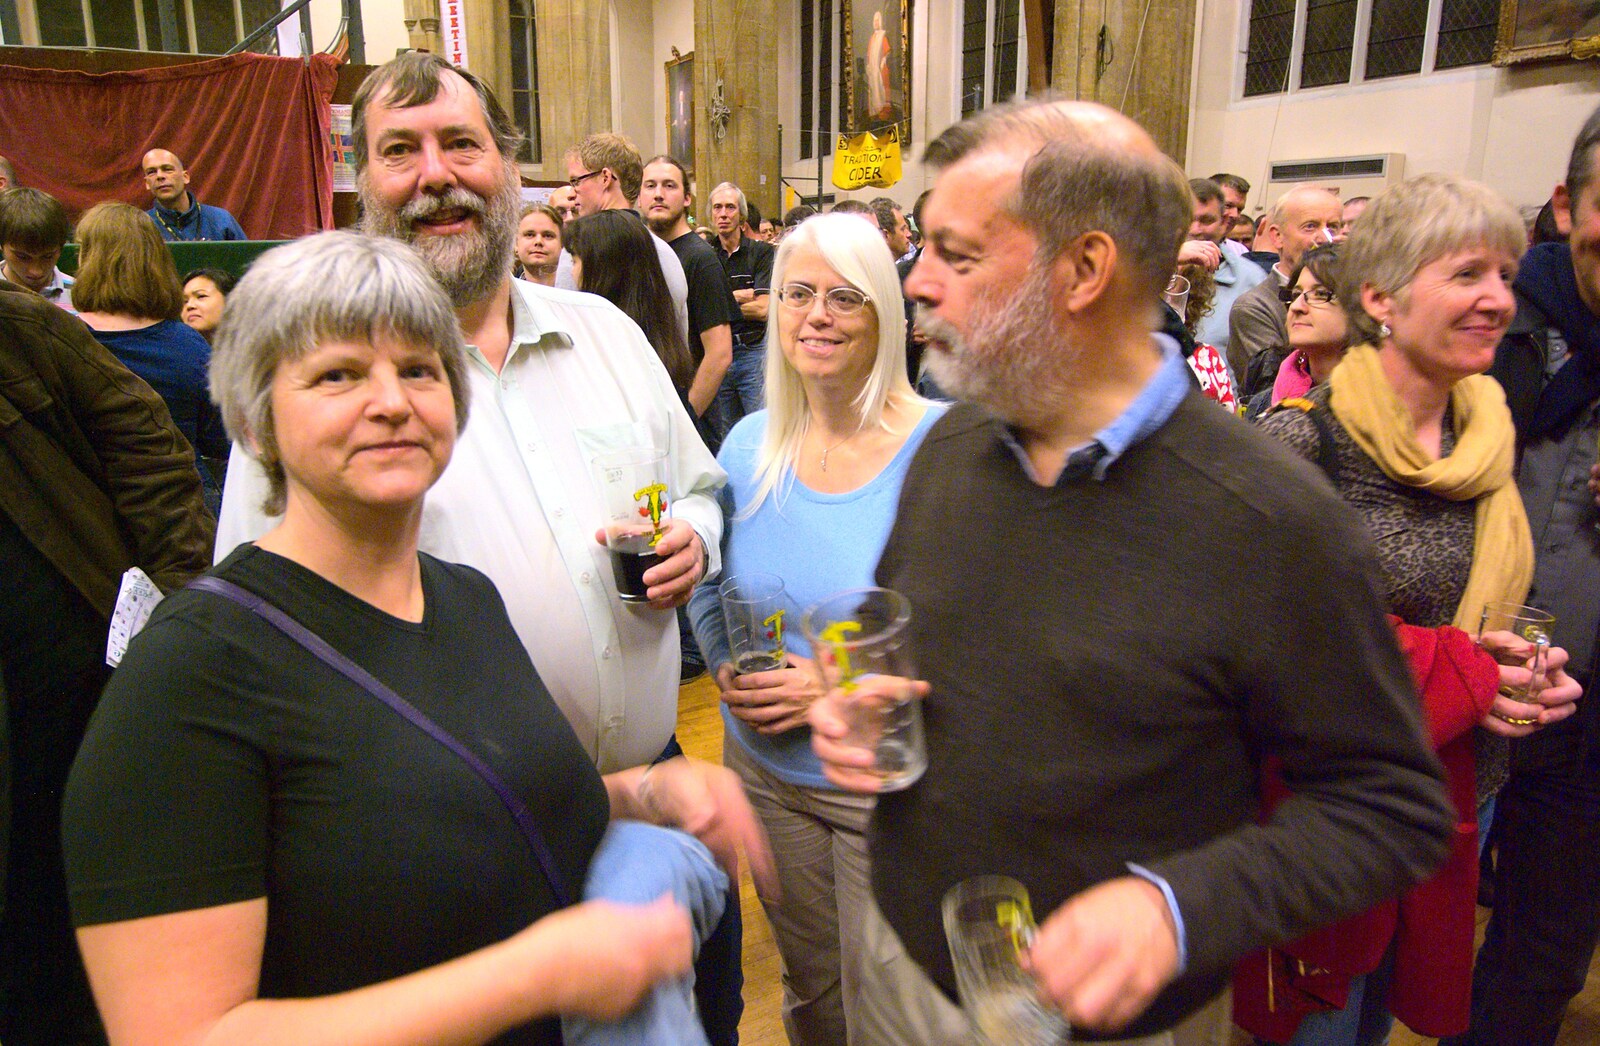 Gloria, Gerry, Carol and Benny from The CAMRA Norwich Beer Festival, St. Andrew's Hall, Norwich - 26th October 2011